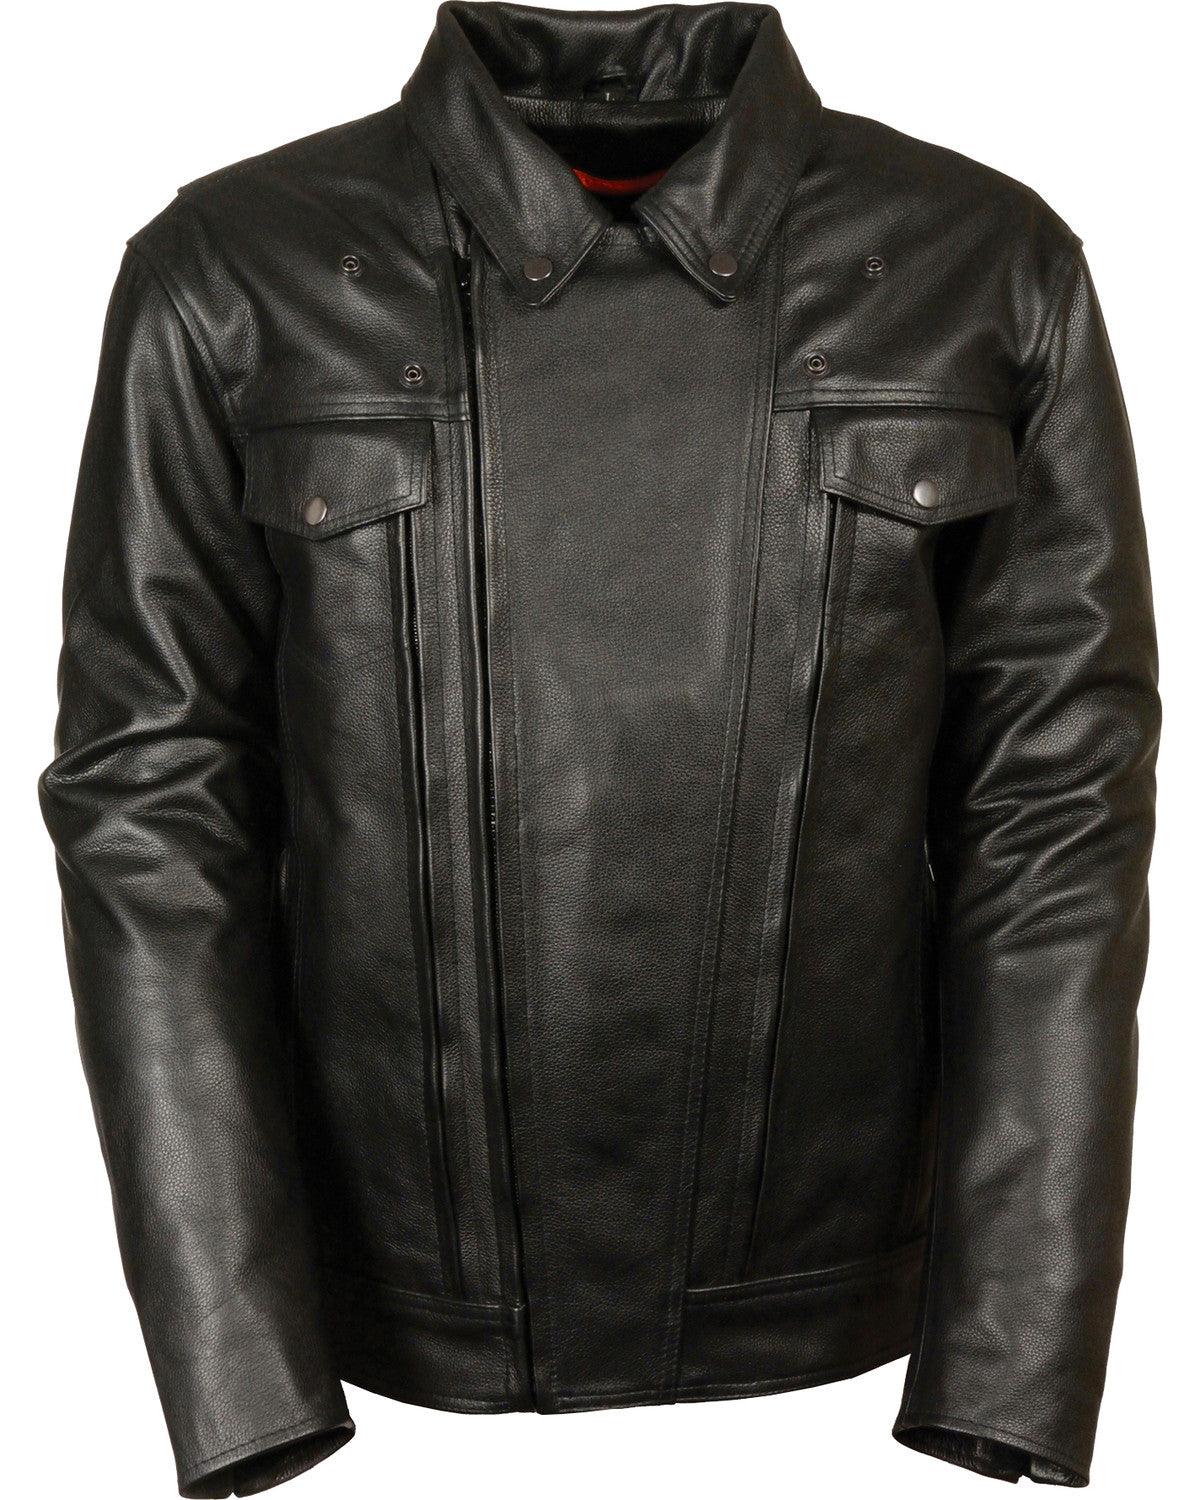 Utility Vented Cruiser Leather Jacket - Tall 5X For Men